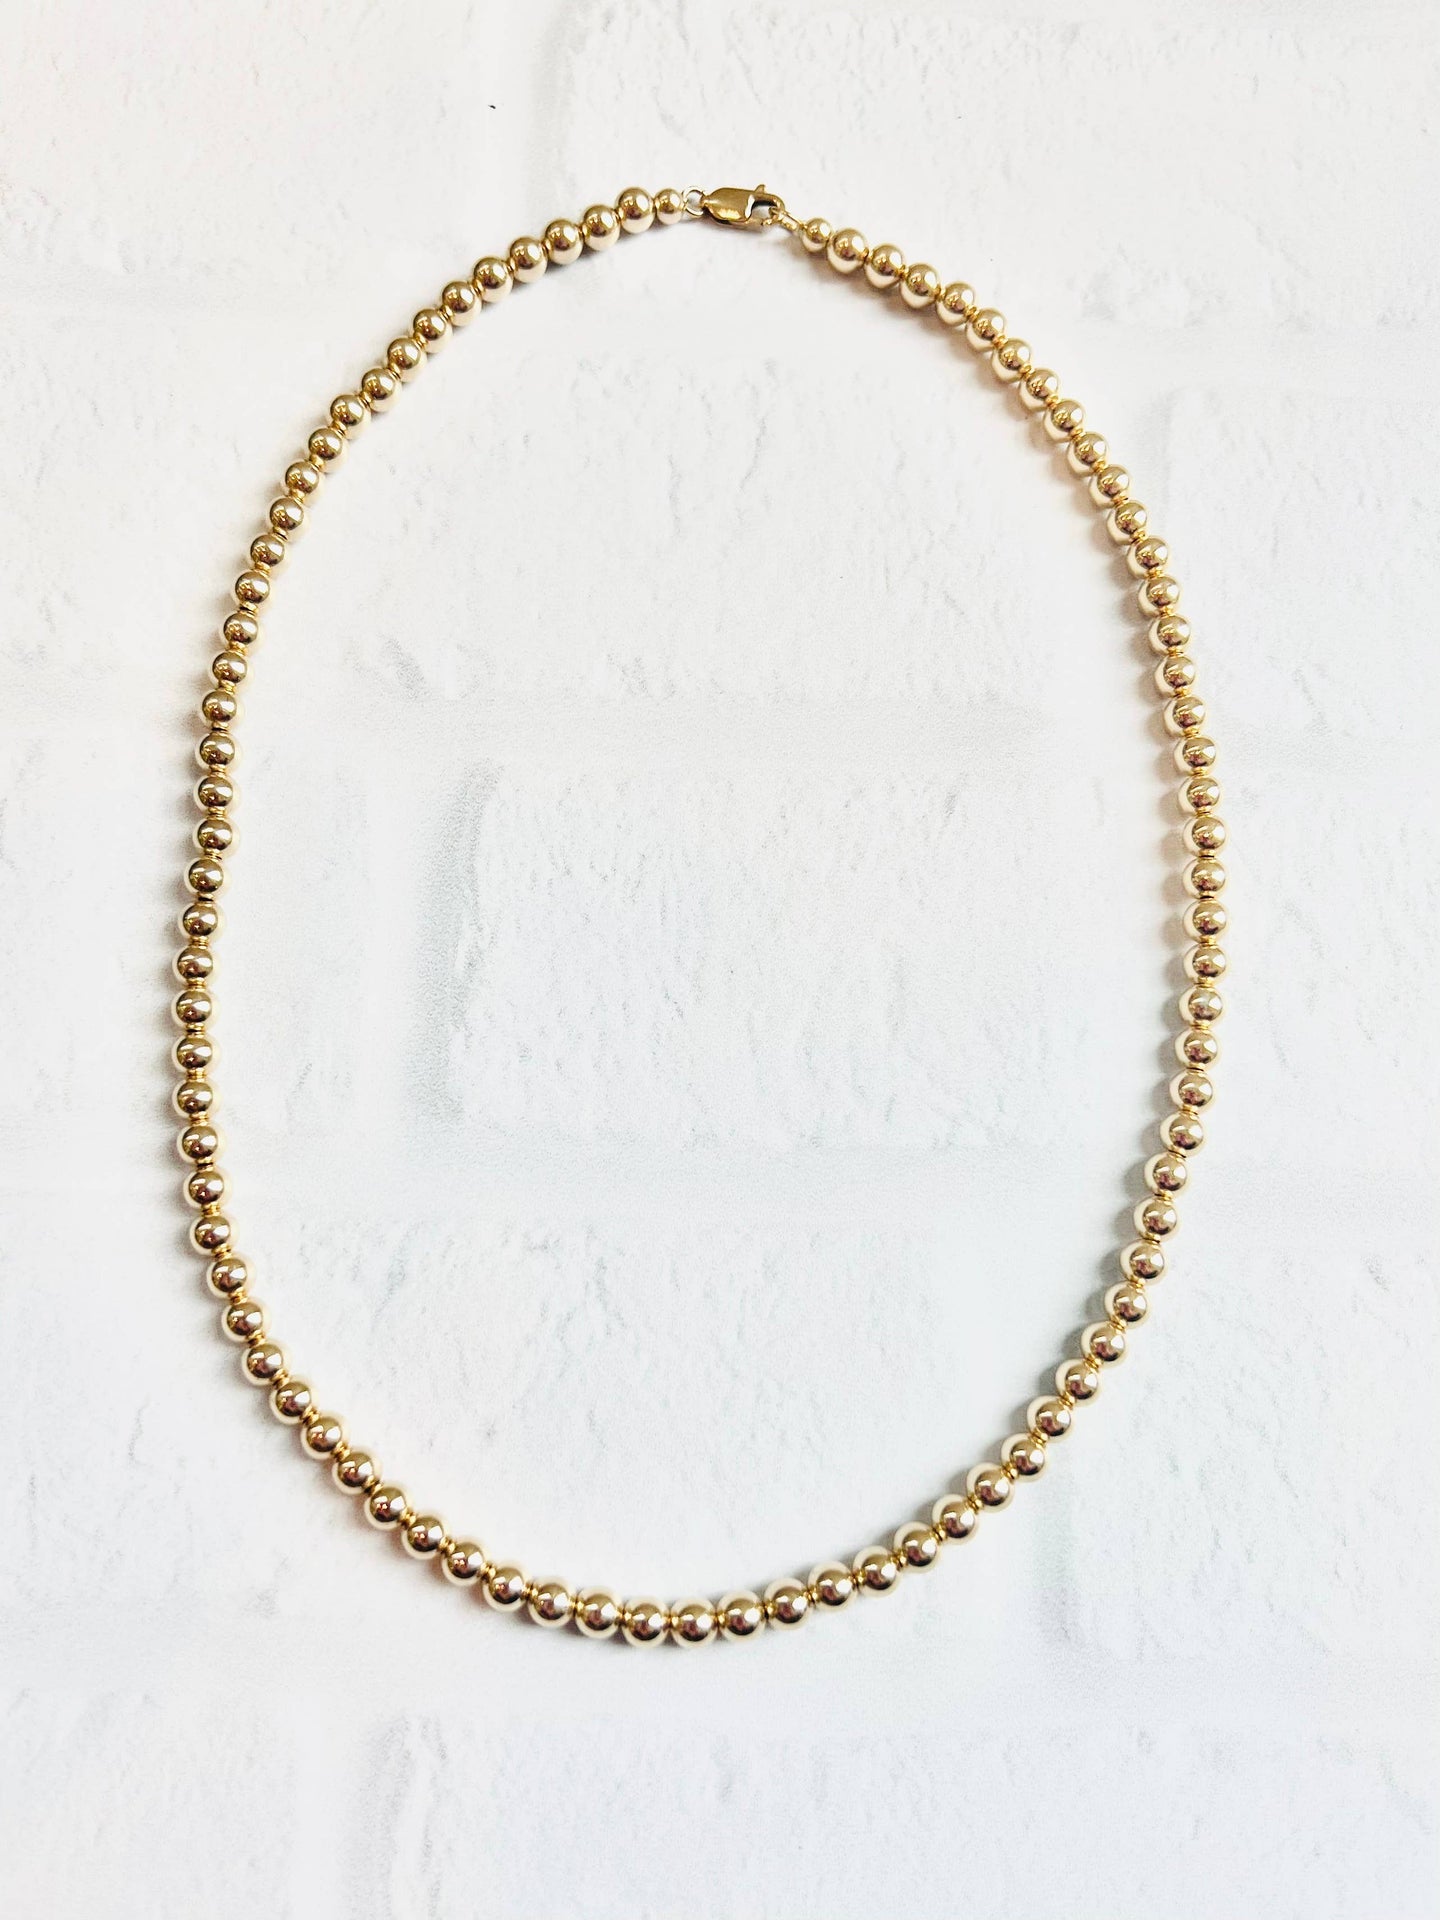 4mm 14k gold filled beaded necklace: 16 inches